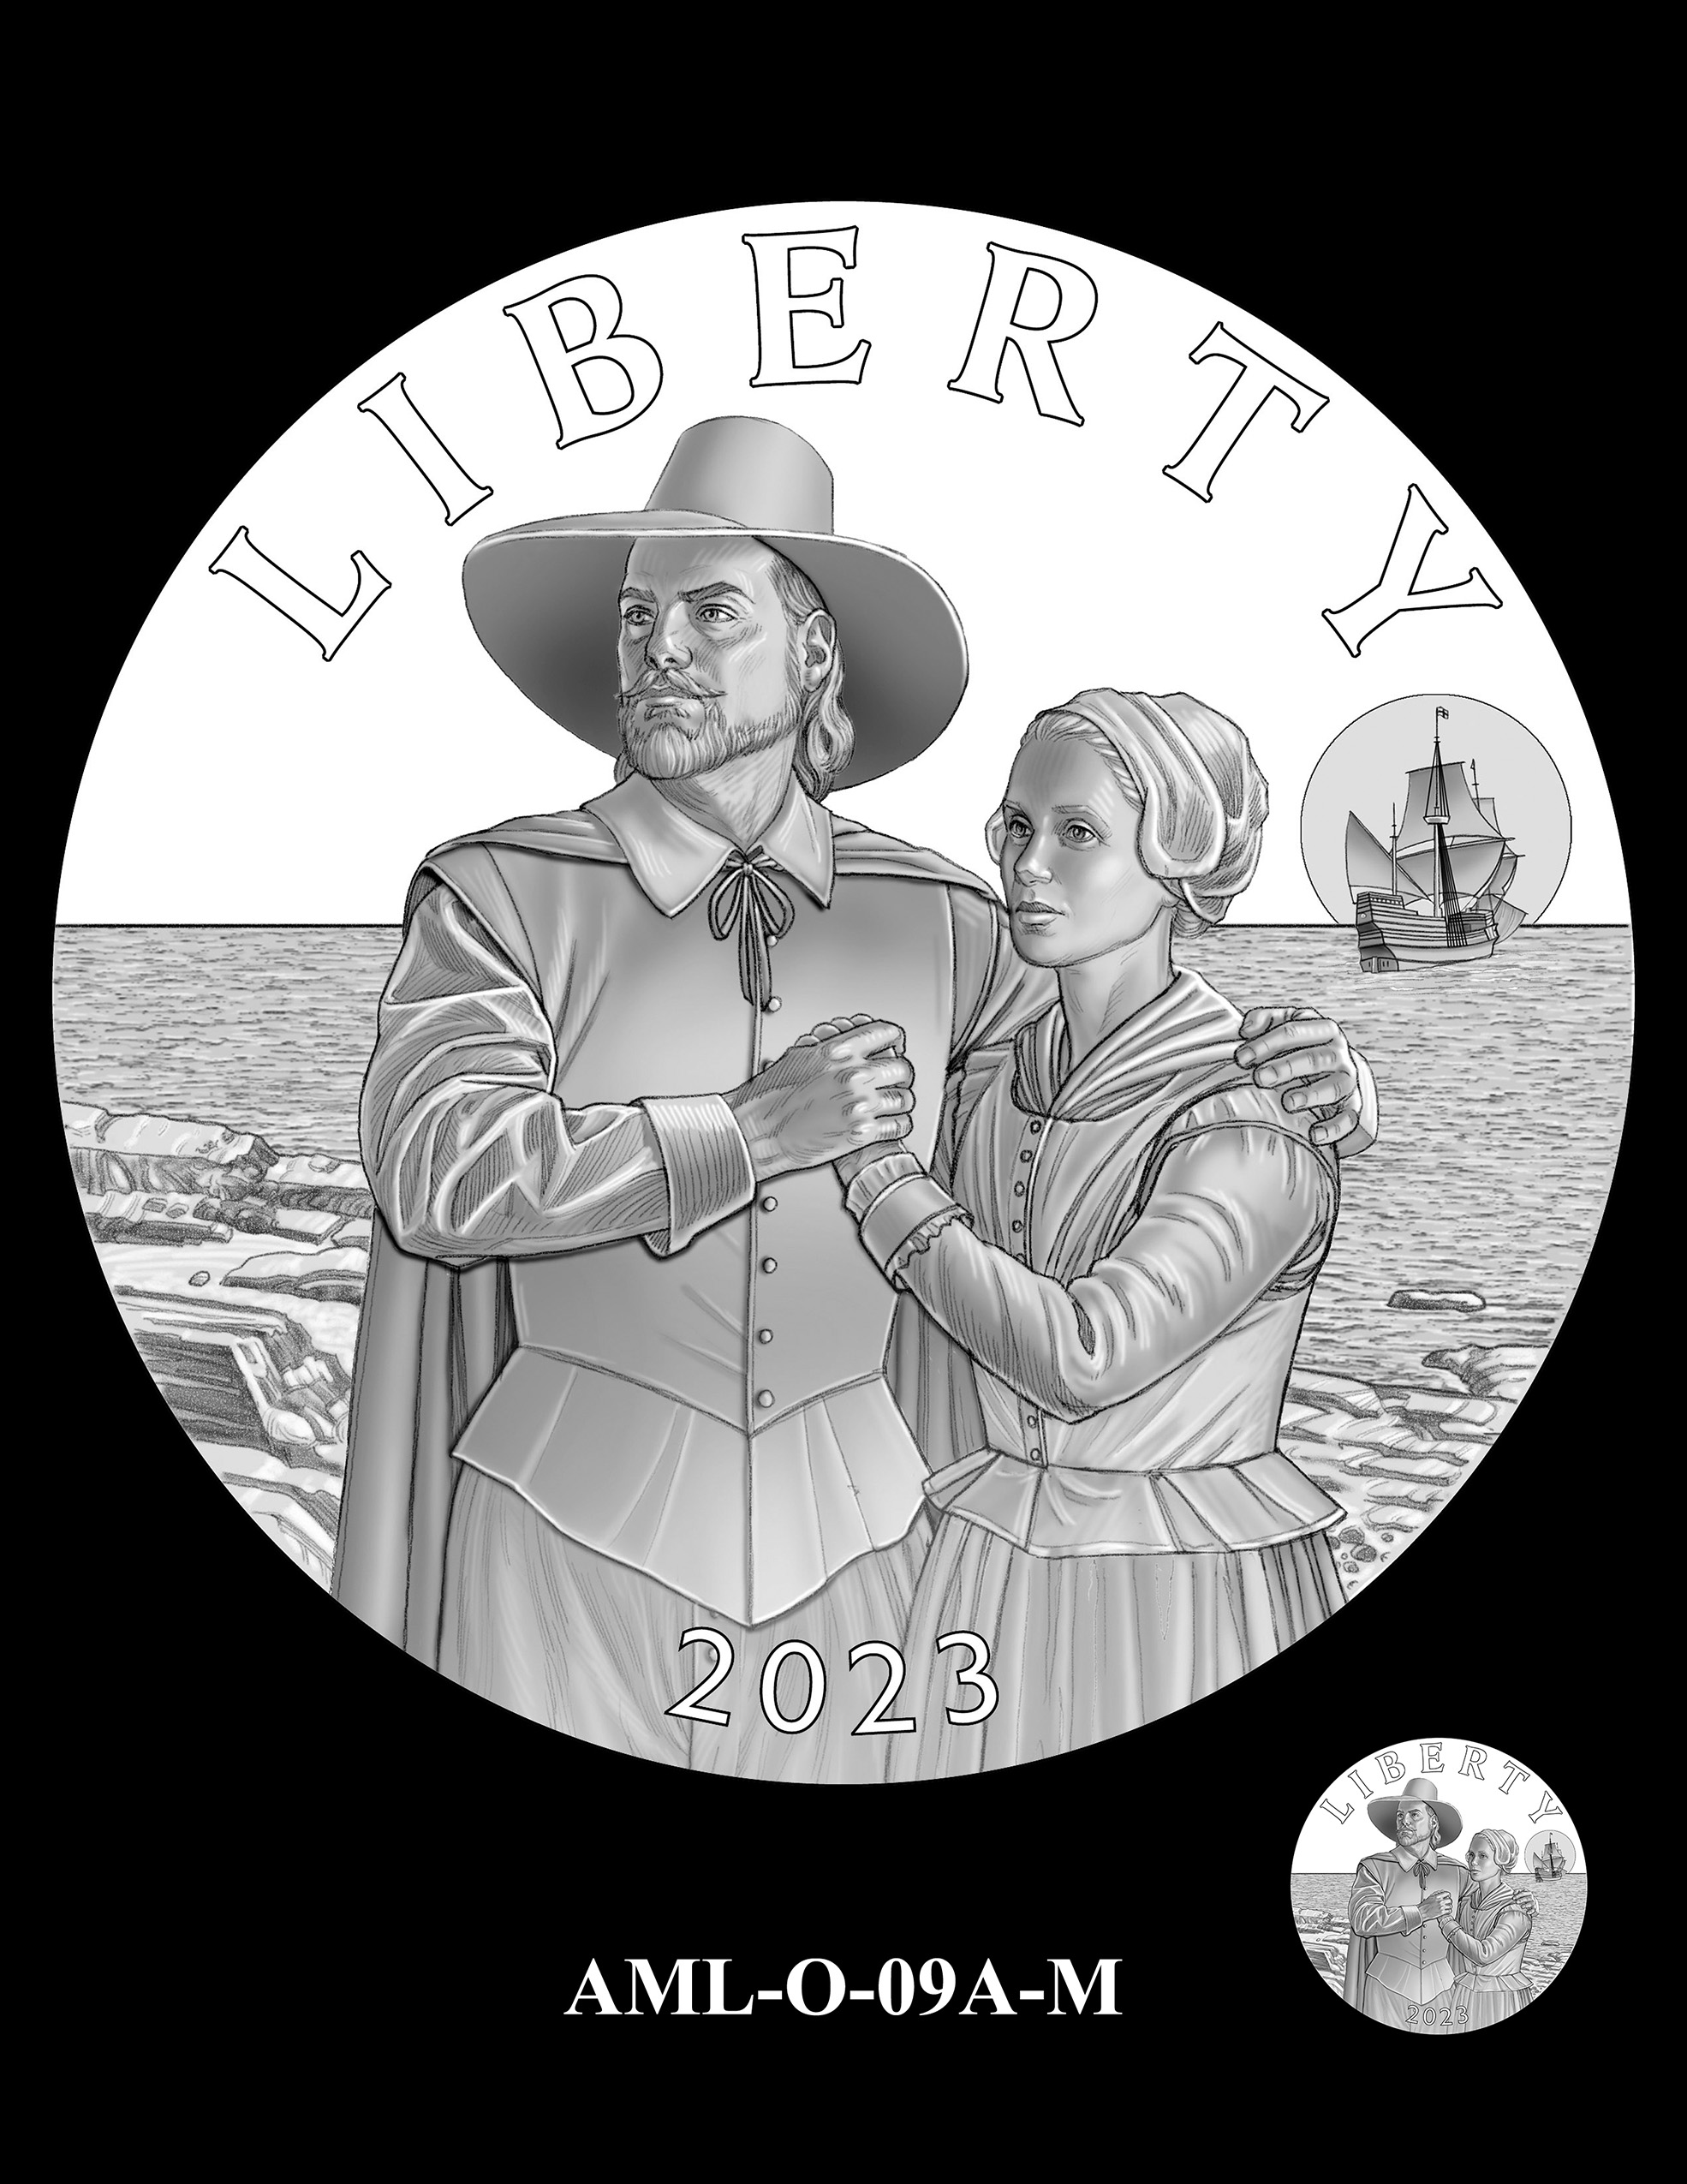 AML-O-09A-M -- 2023 American Liberty High Relief 24k Gold and Silver Medal Program